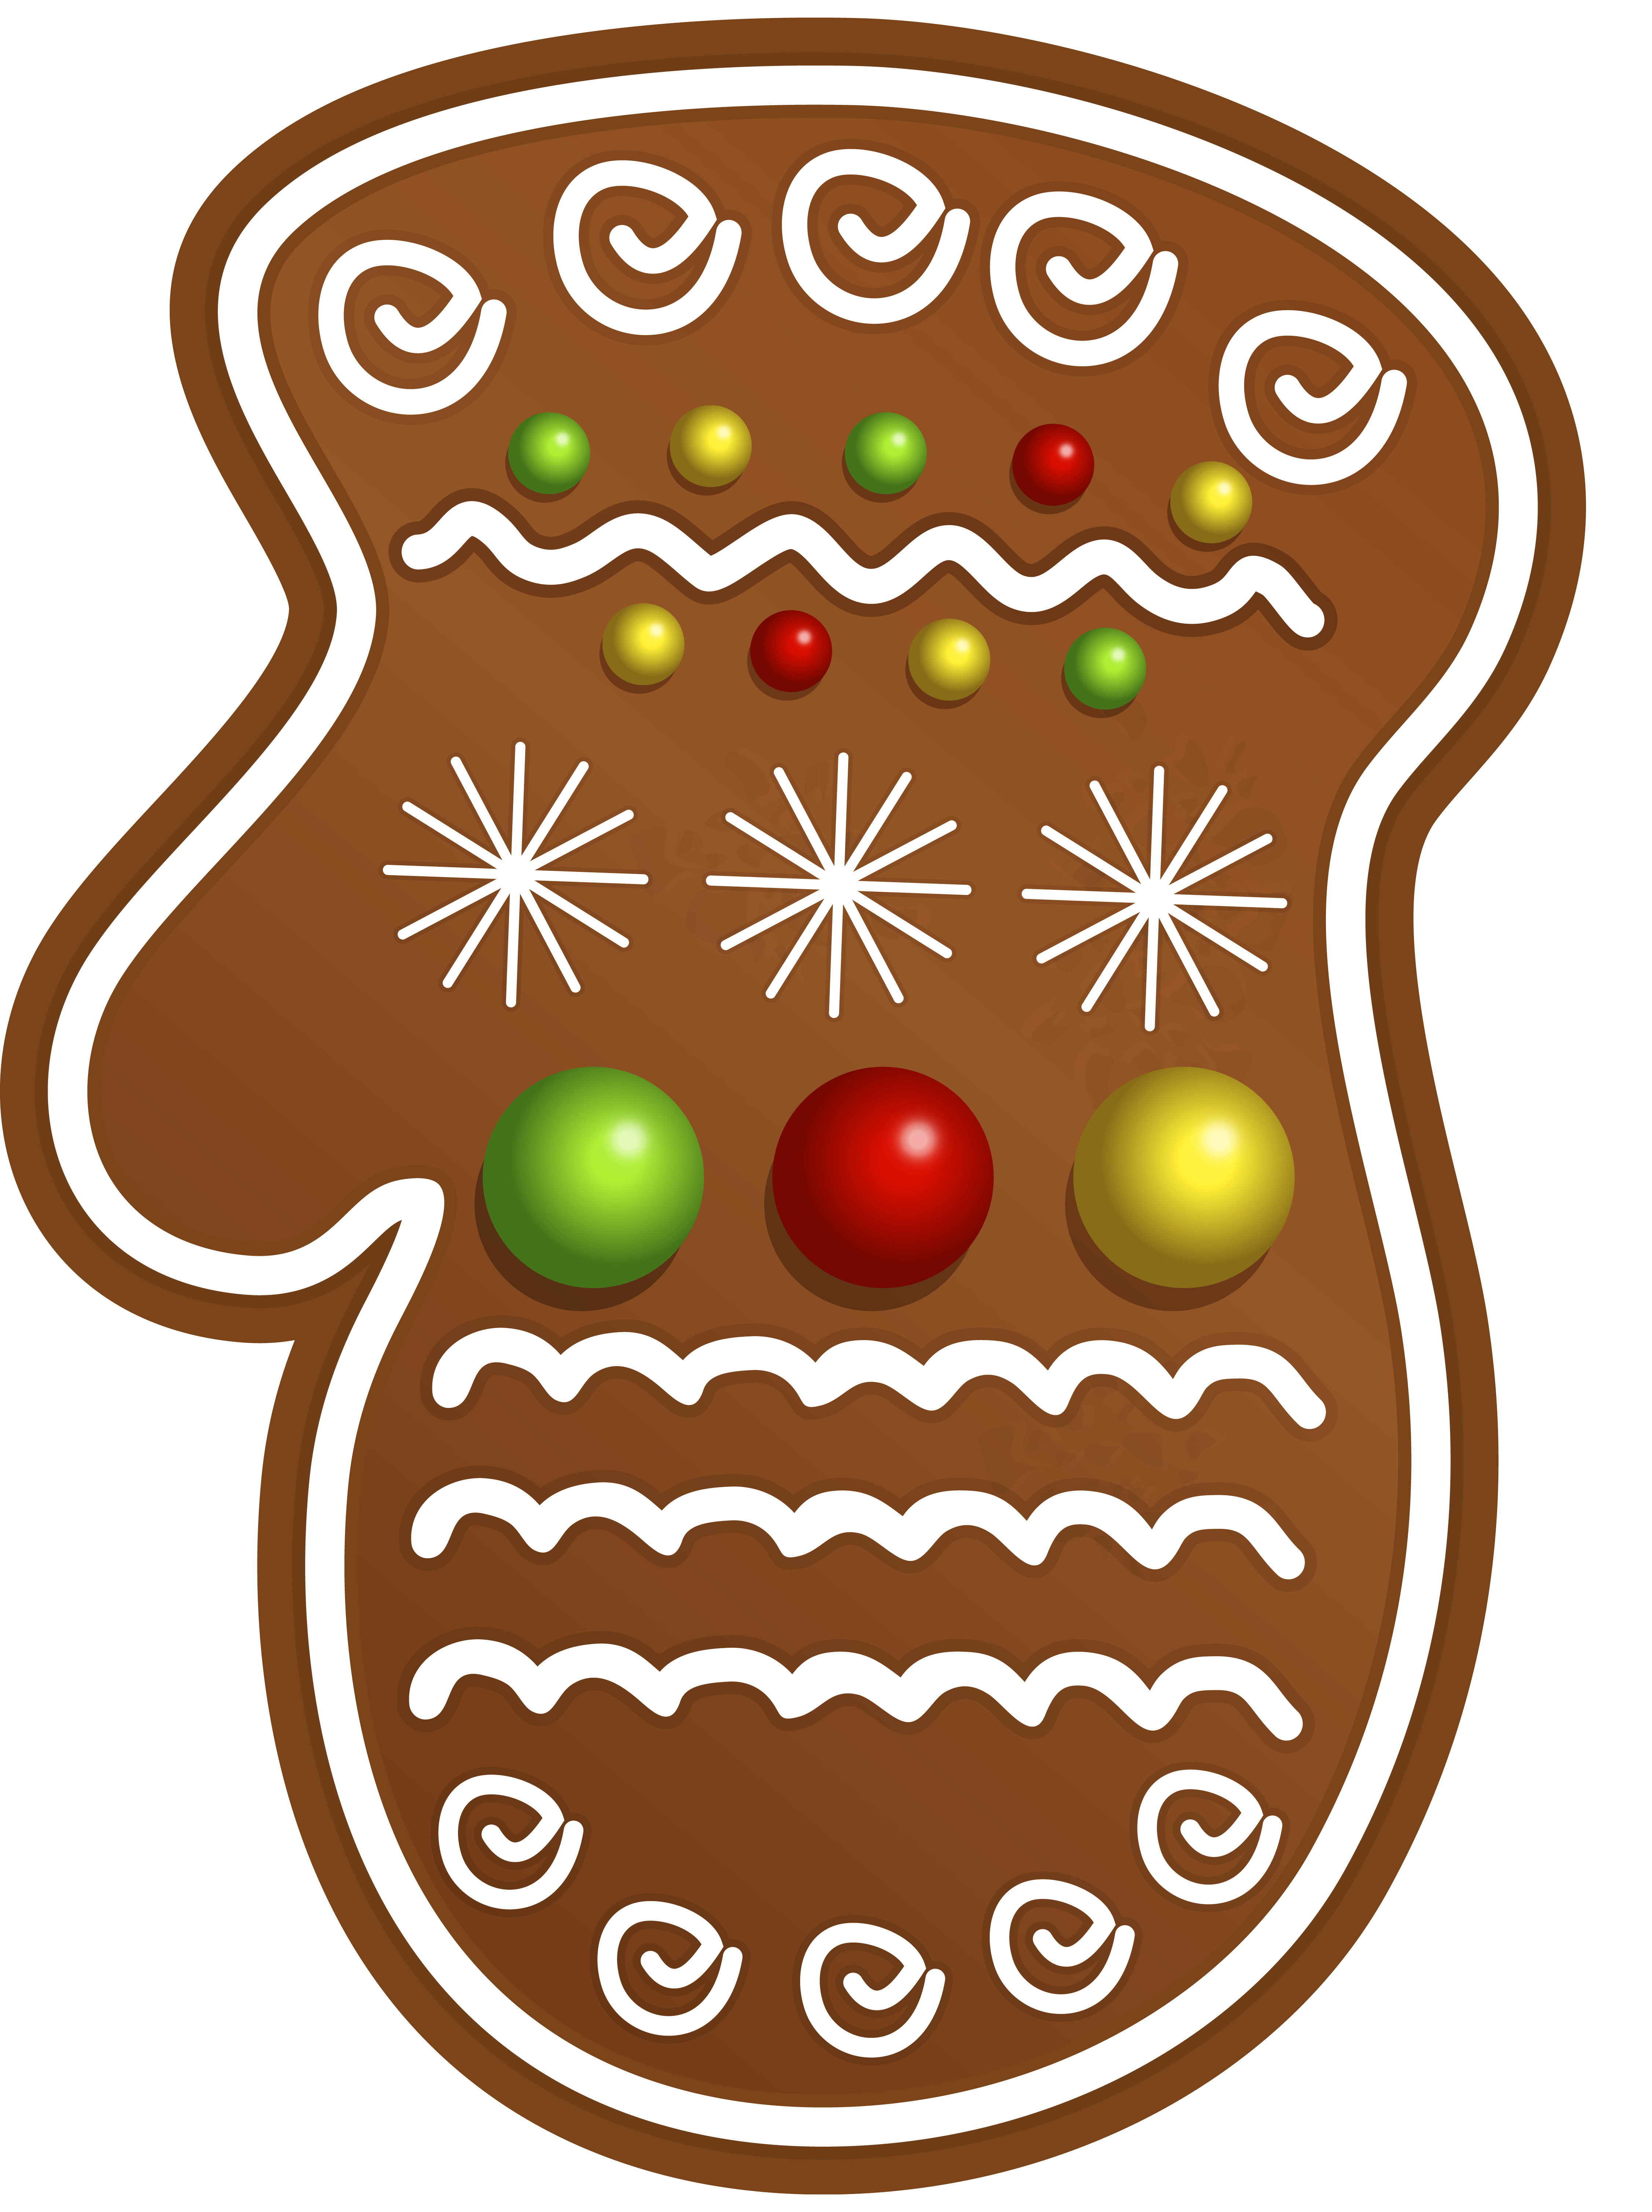 Christmas Cookie Glove PNG Clipart Image | Gallery ...